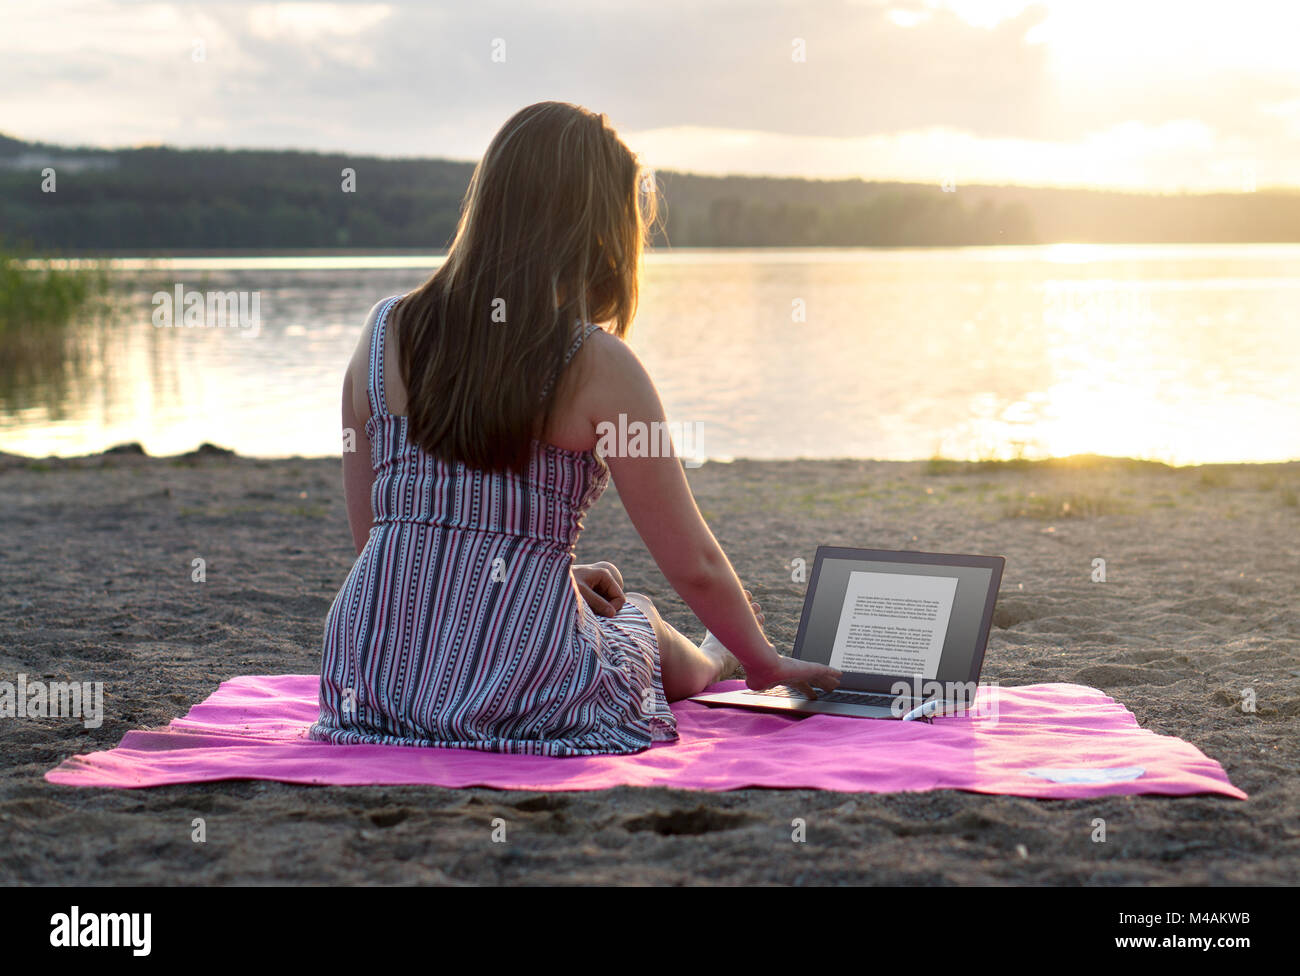 Young attractive woman using laptop on beach at sunset. Active lifestyle. Student doing homework or entrepreneur working late. Stock Photo